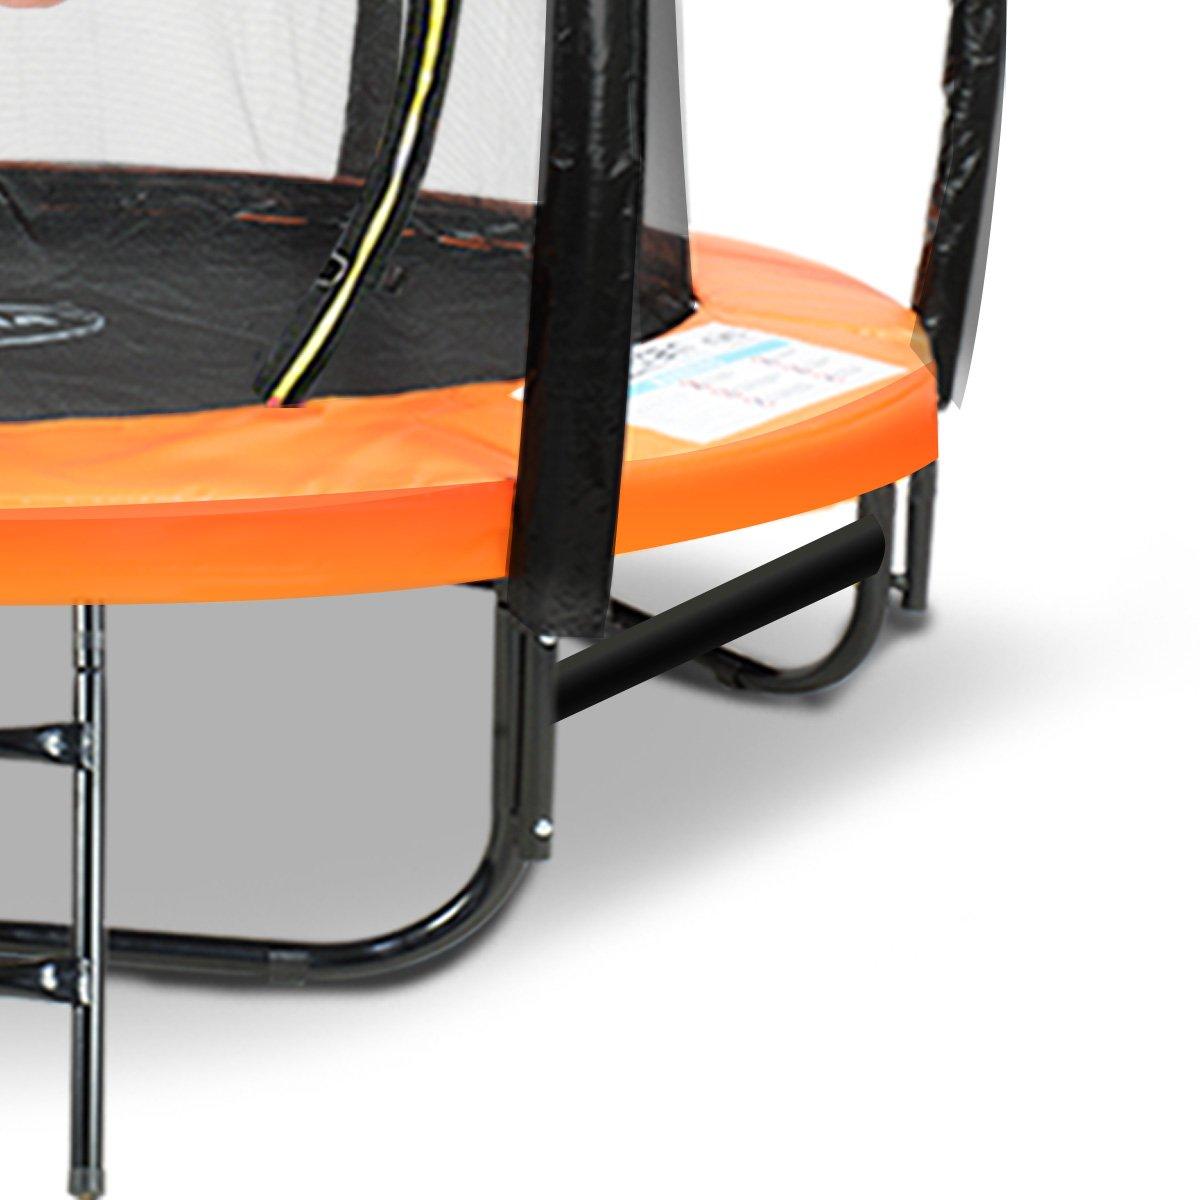 Buy Kahuna 8ft Outdoor Orange Trampoline For Kids And Children Suited For Fitness Exercise Gymnastics With Safety Enclosure Basketball Hoop Set discounted | Products On Sale Australia